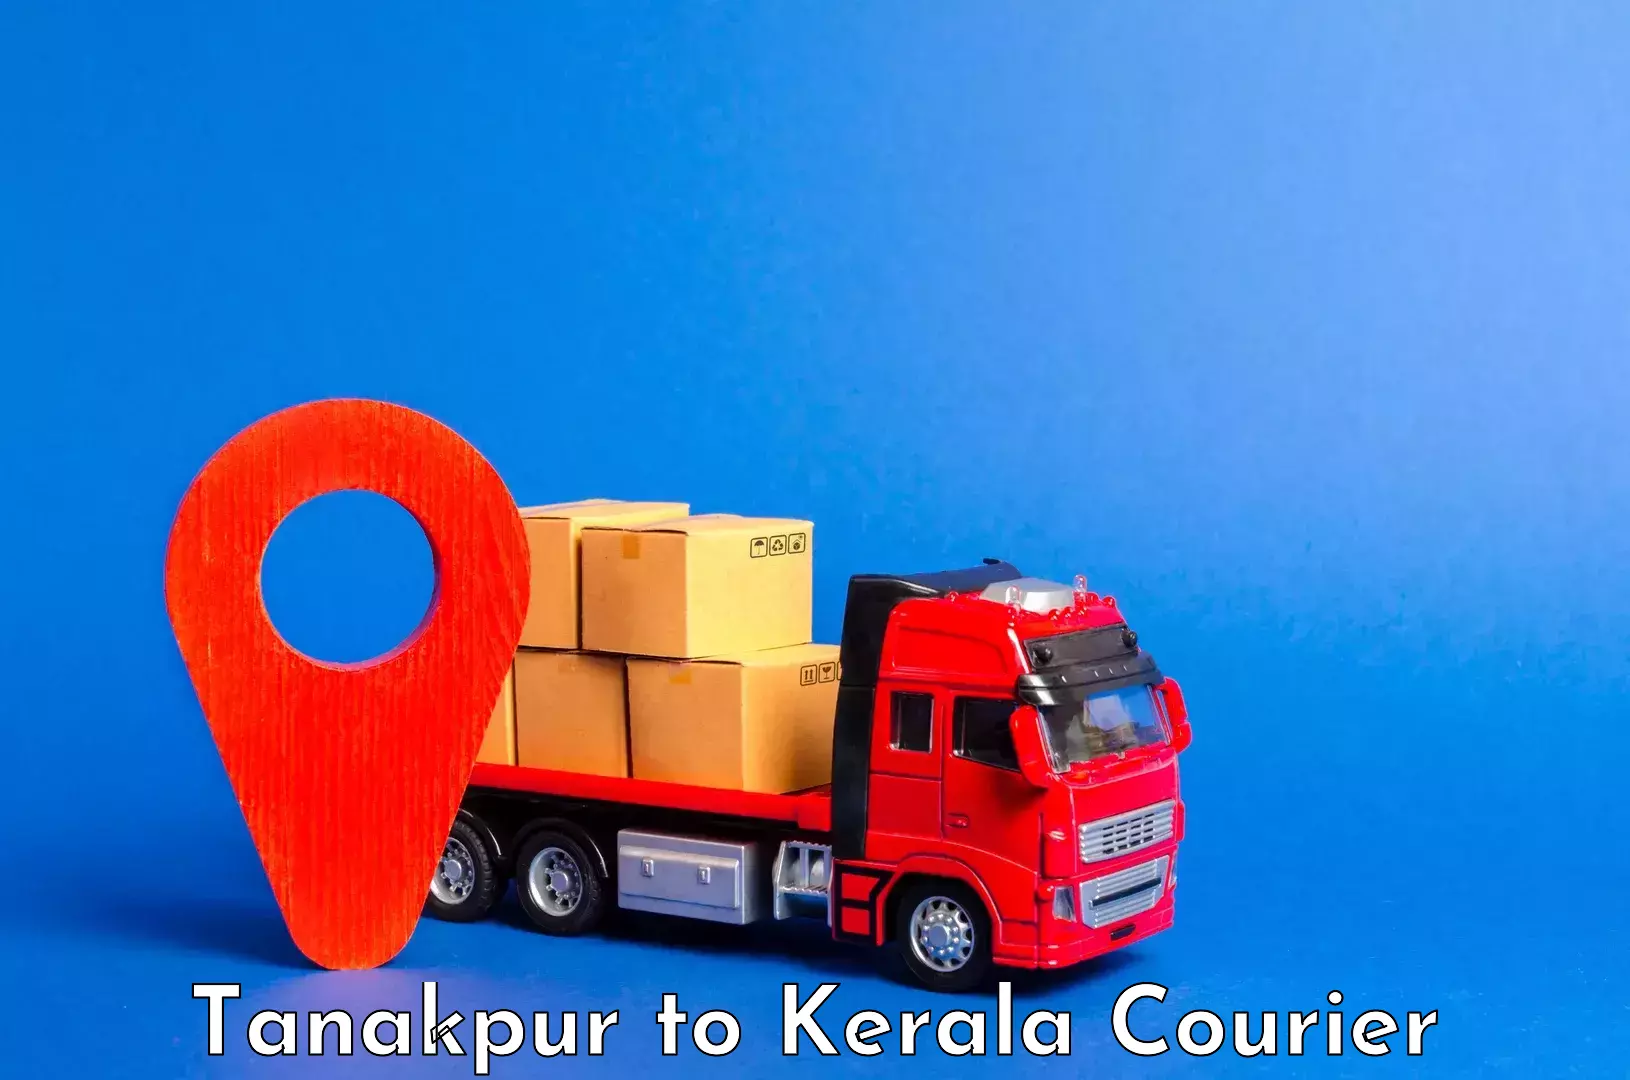 Baggage delivery support Tanakpur to Cochin Port Kochi